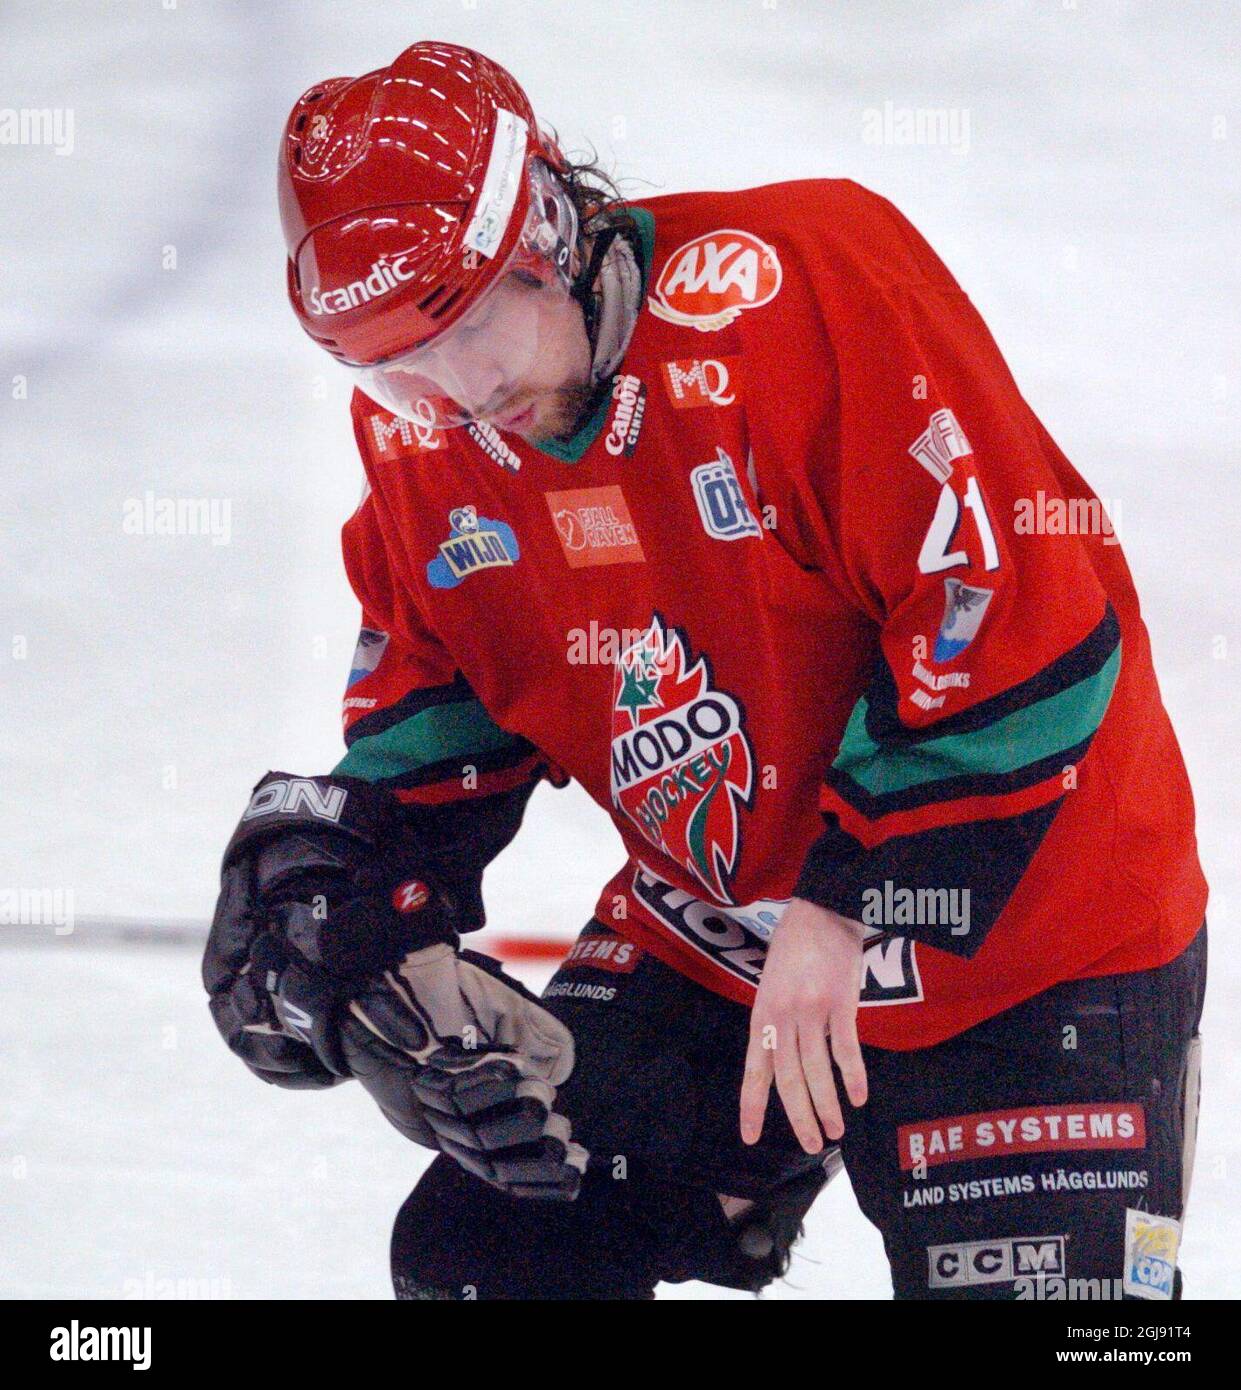 Modo's Peter Forsberg looks in pain after injuring his hand following a collission with Linkoping's Johan Franzen. Forsberg is playing for Modo during the NHL strike and lock out but could now miss the rest of the season. Stock Photo